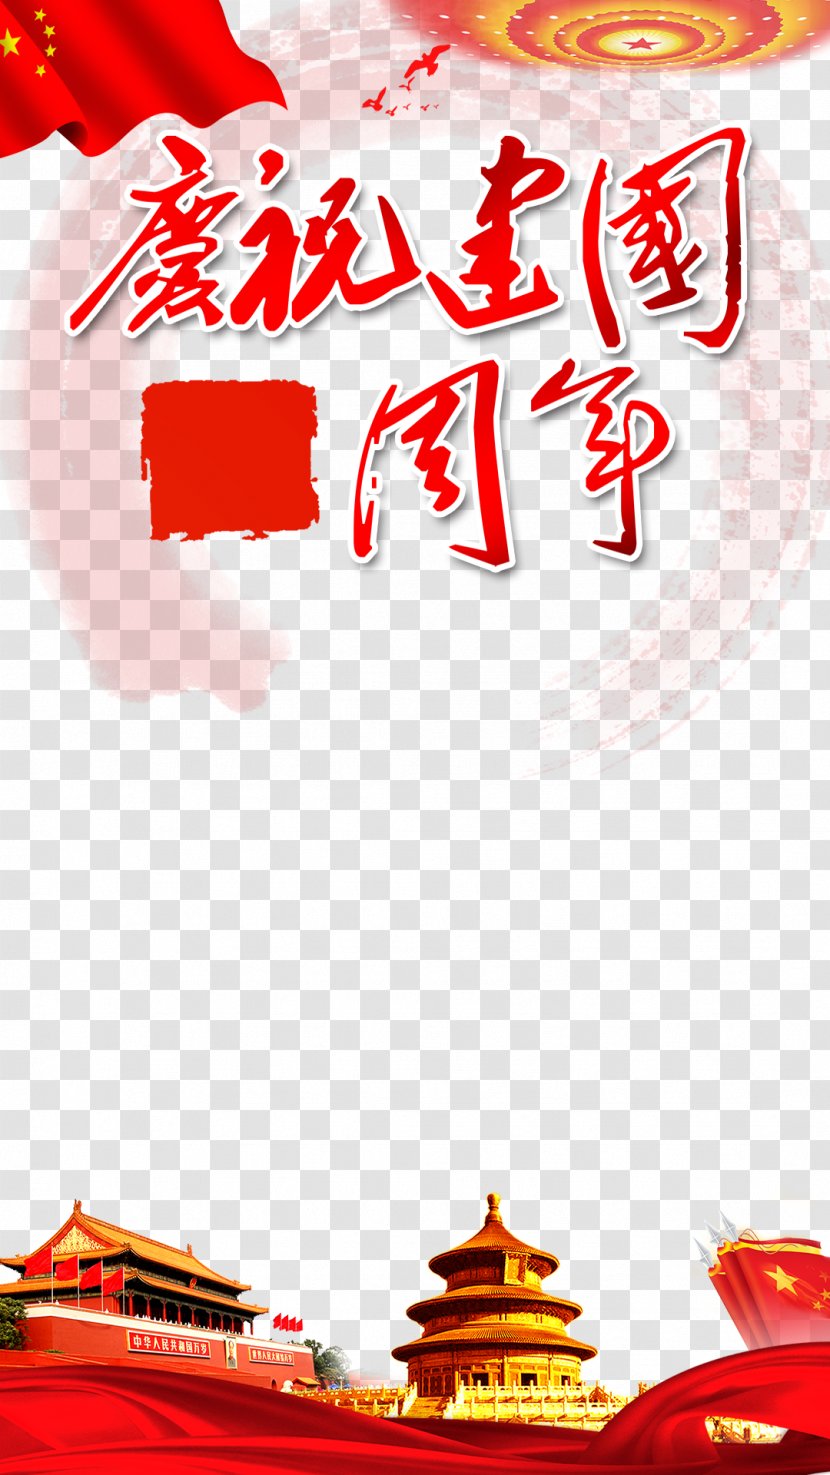 Poster - Red - Party Construction Background Download Transparent PNG